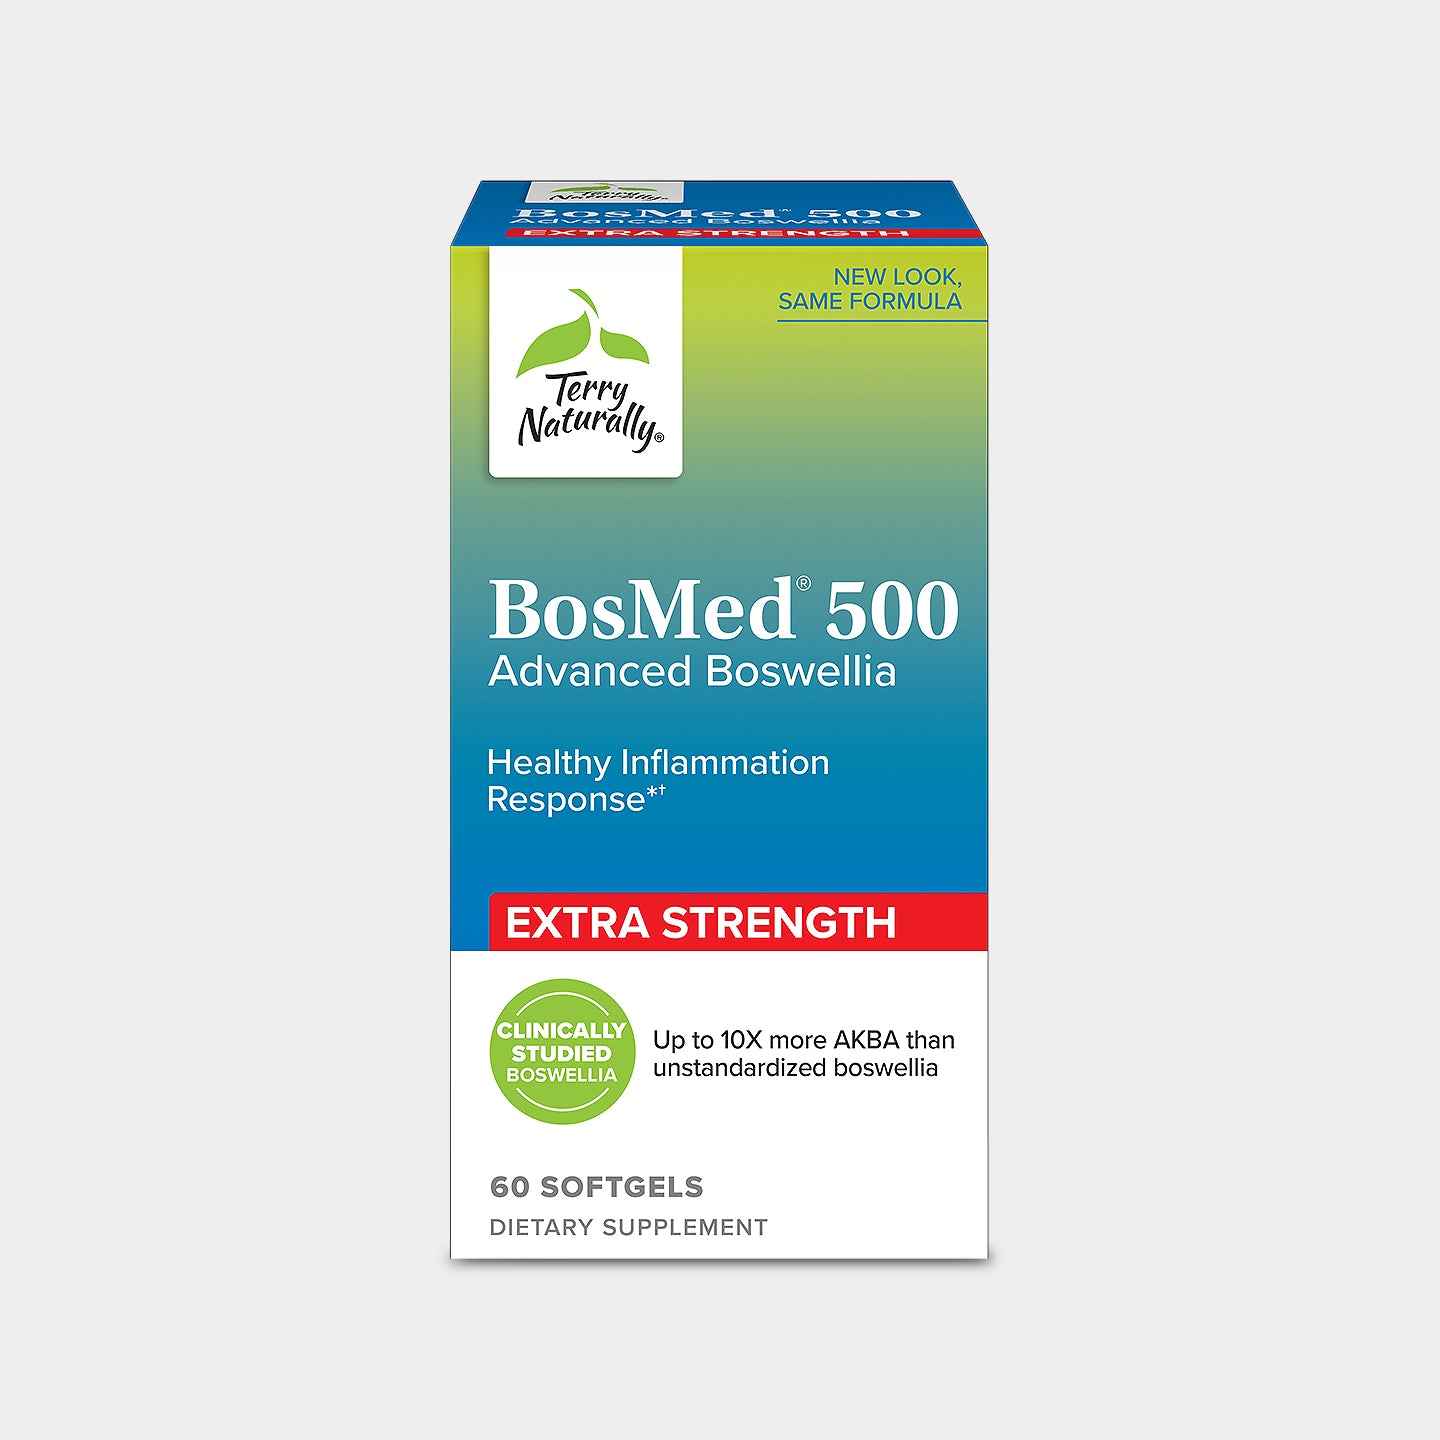 Terry Naturally BosMed 500 BOS-10 Boswellia A1